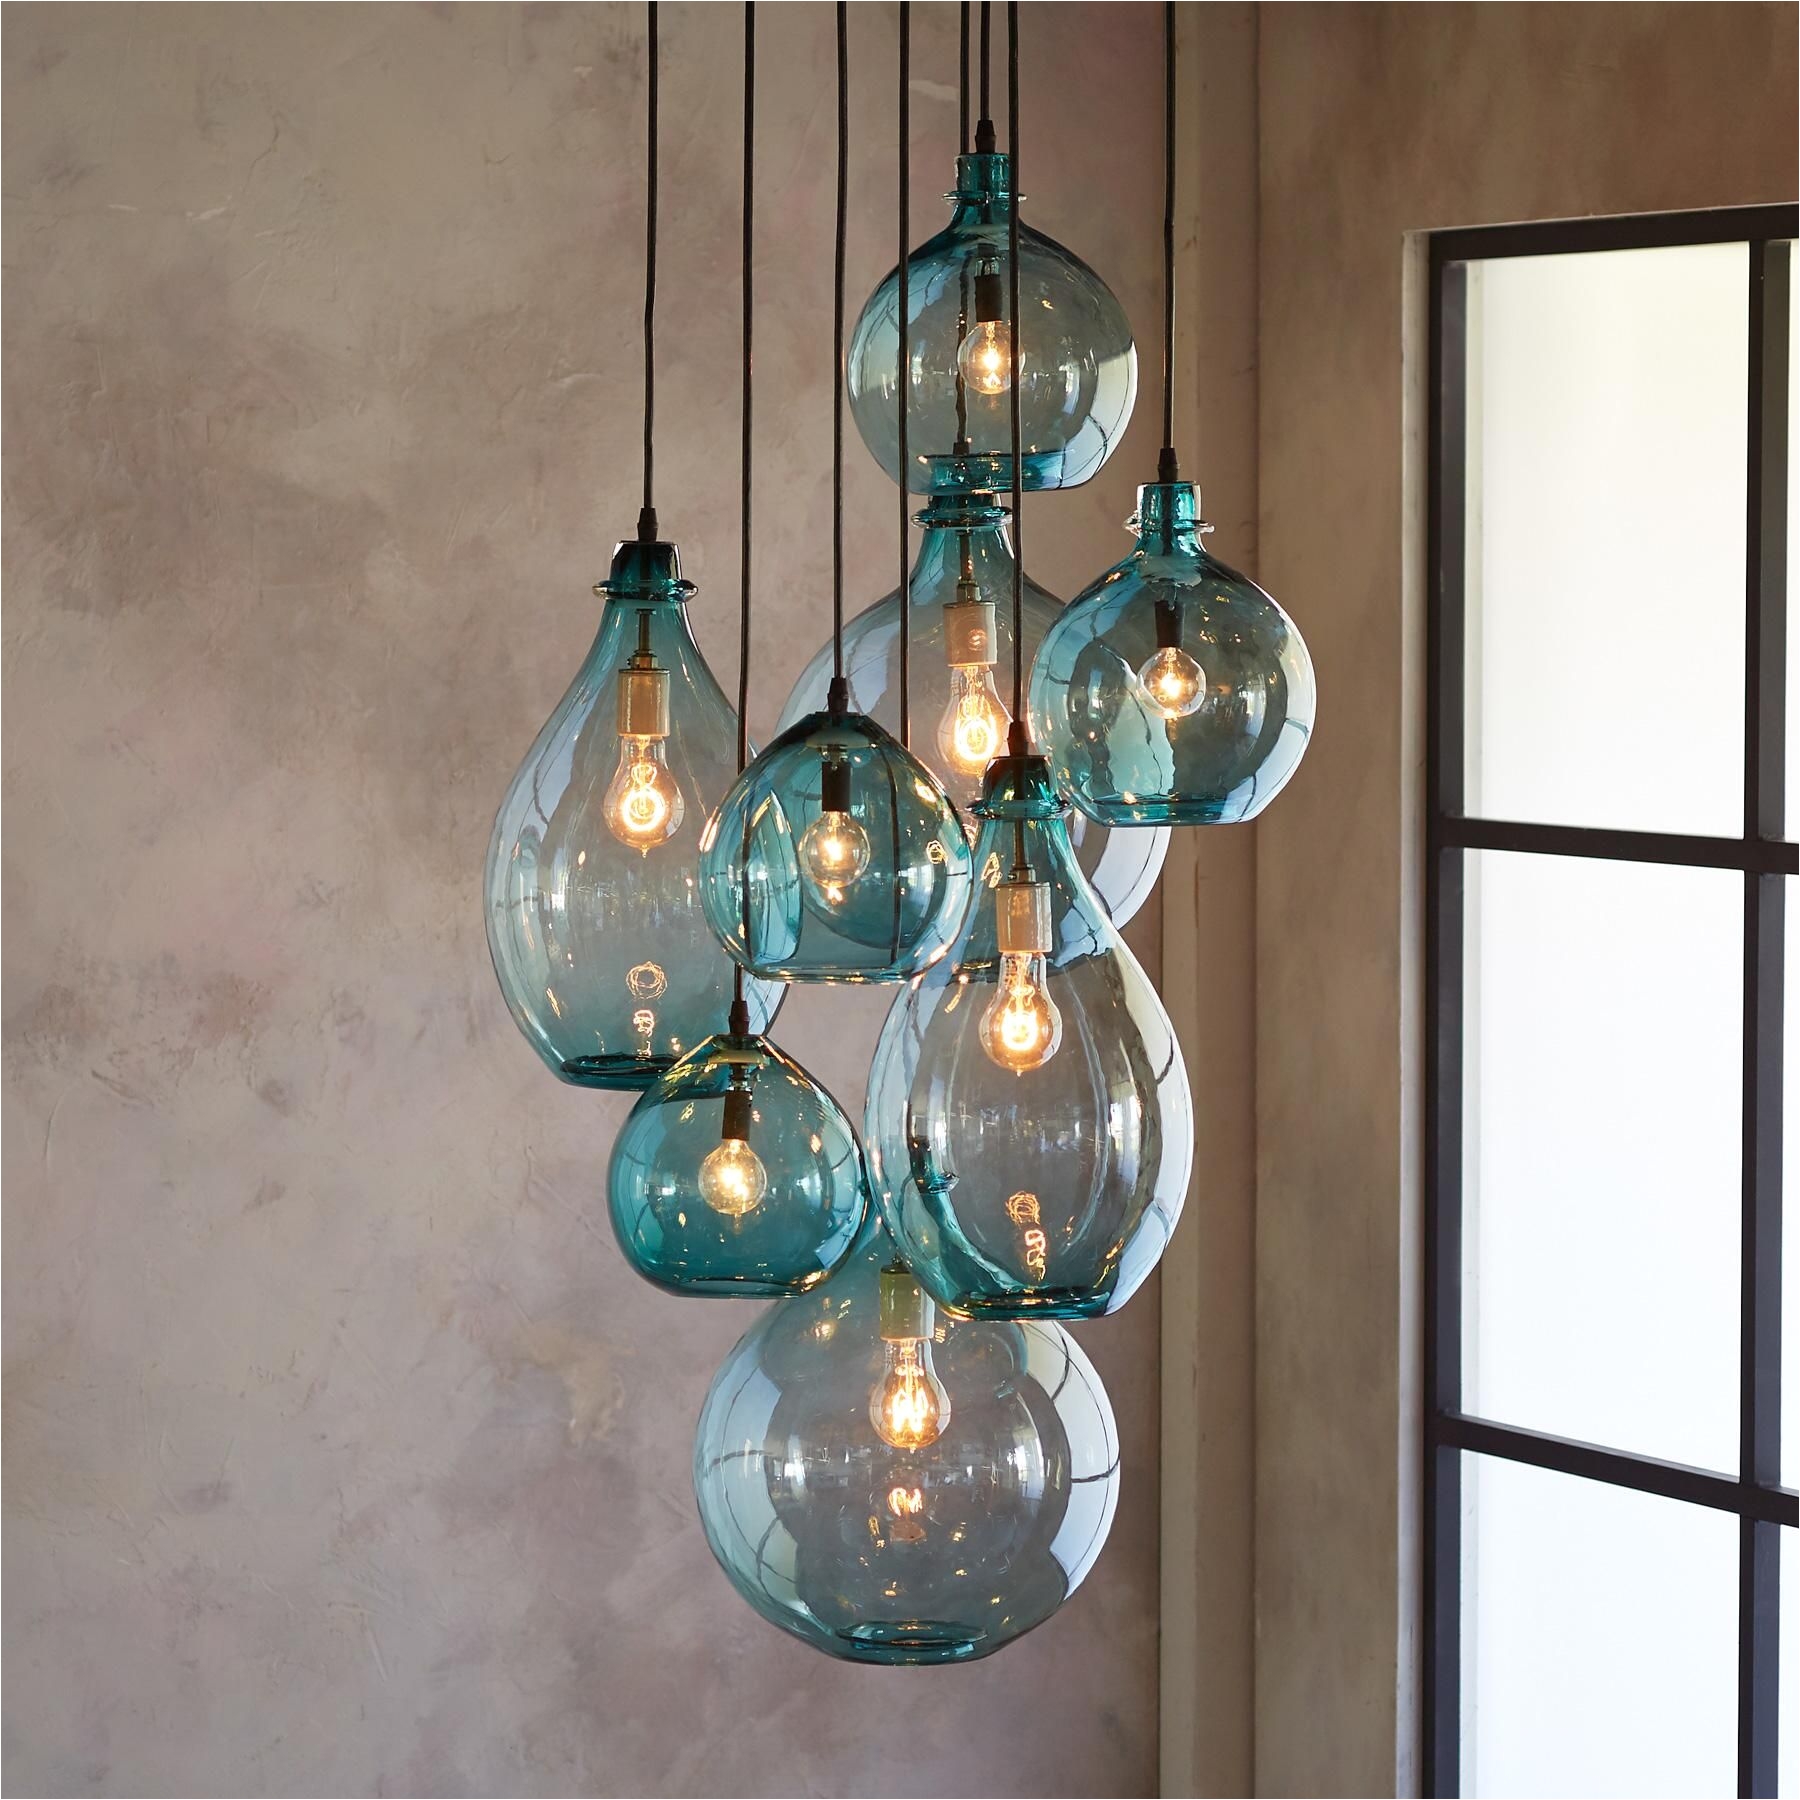 salon glass pendant canopy limpid turquoise drops of hand blown glass envisioned by a los angeles artisan cisco pinedo cluster together beneath a hand